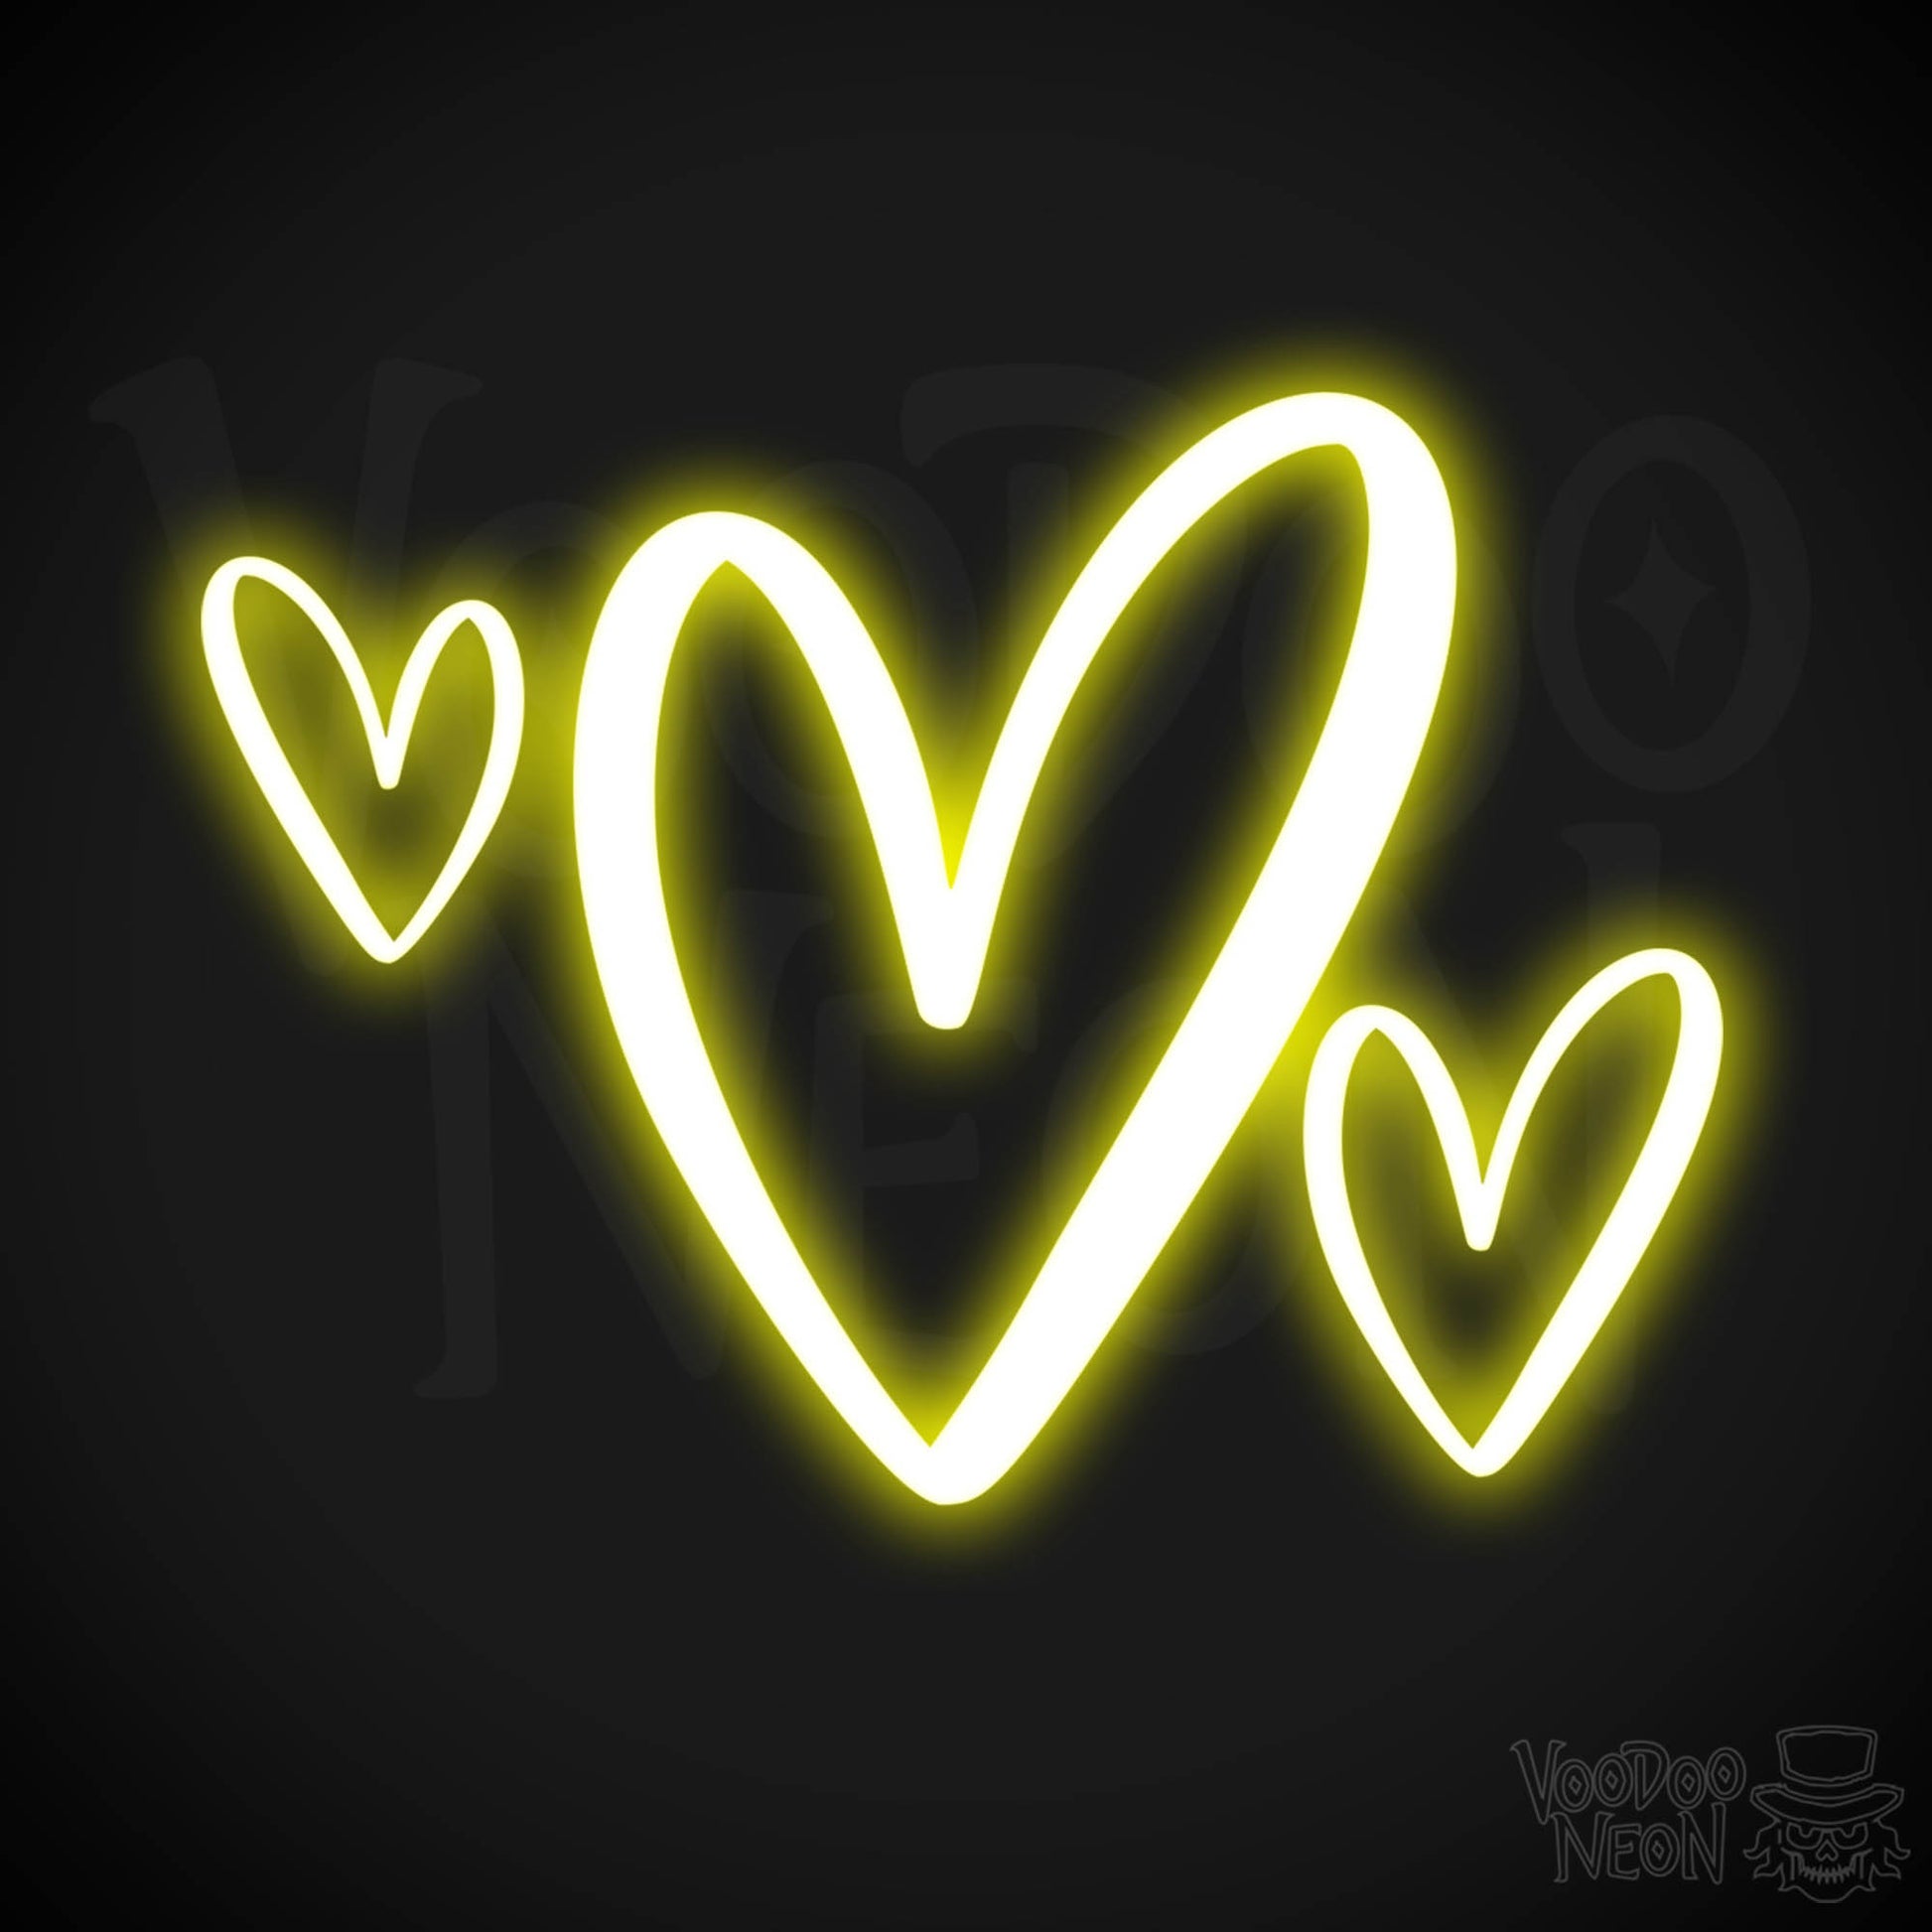 Neon Love Heart - Love Heart Neon Sign - LED Wall Art - Color Yellow